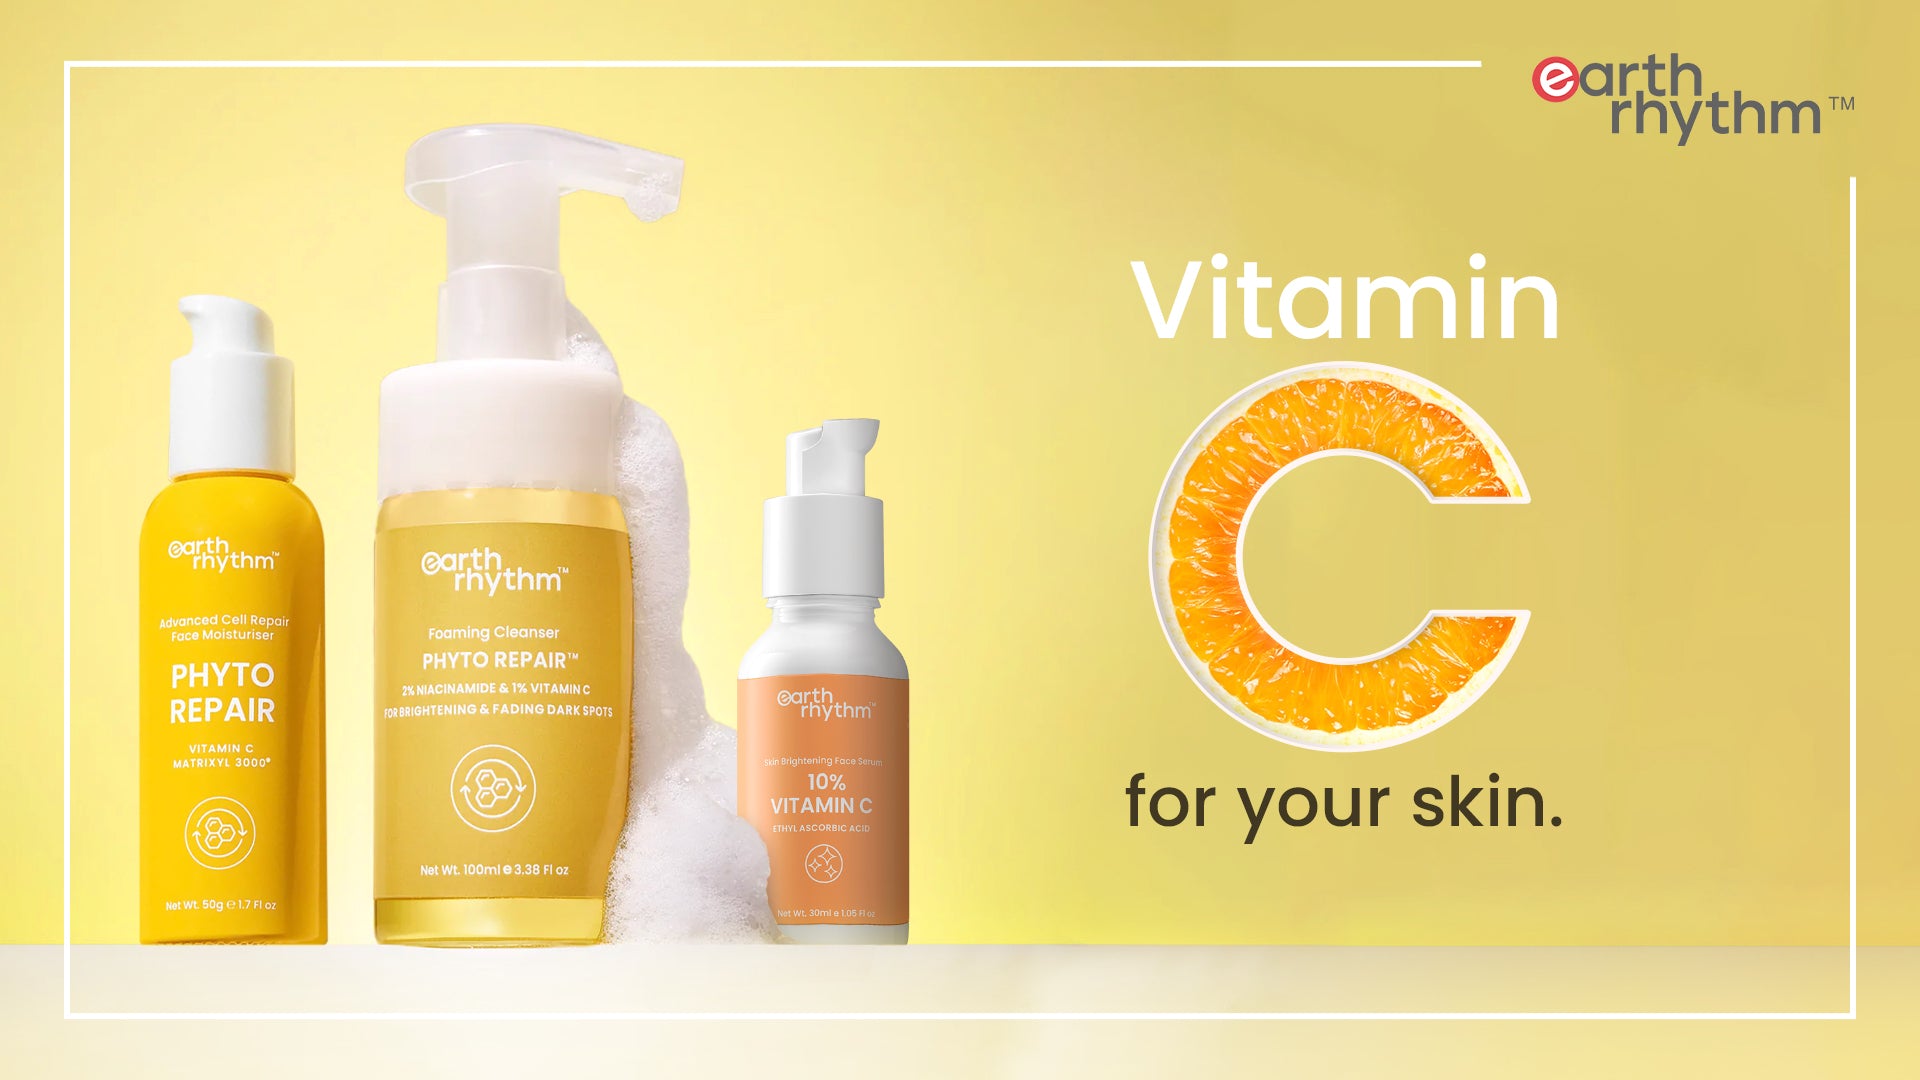 Why Vitamin C is Such a Revered Ingredient for your Skin